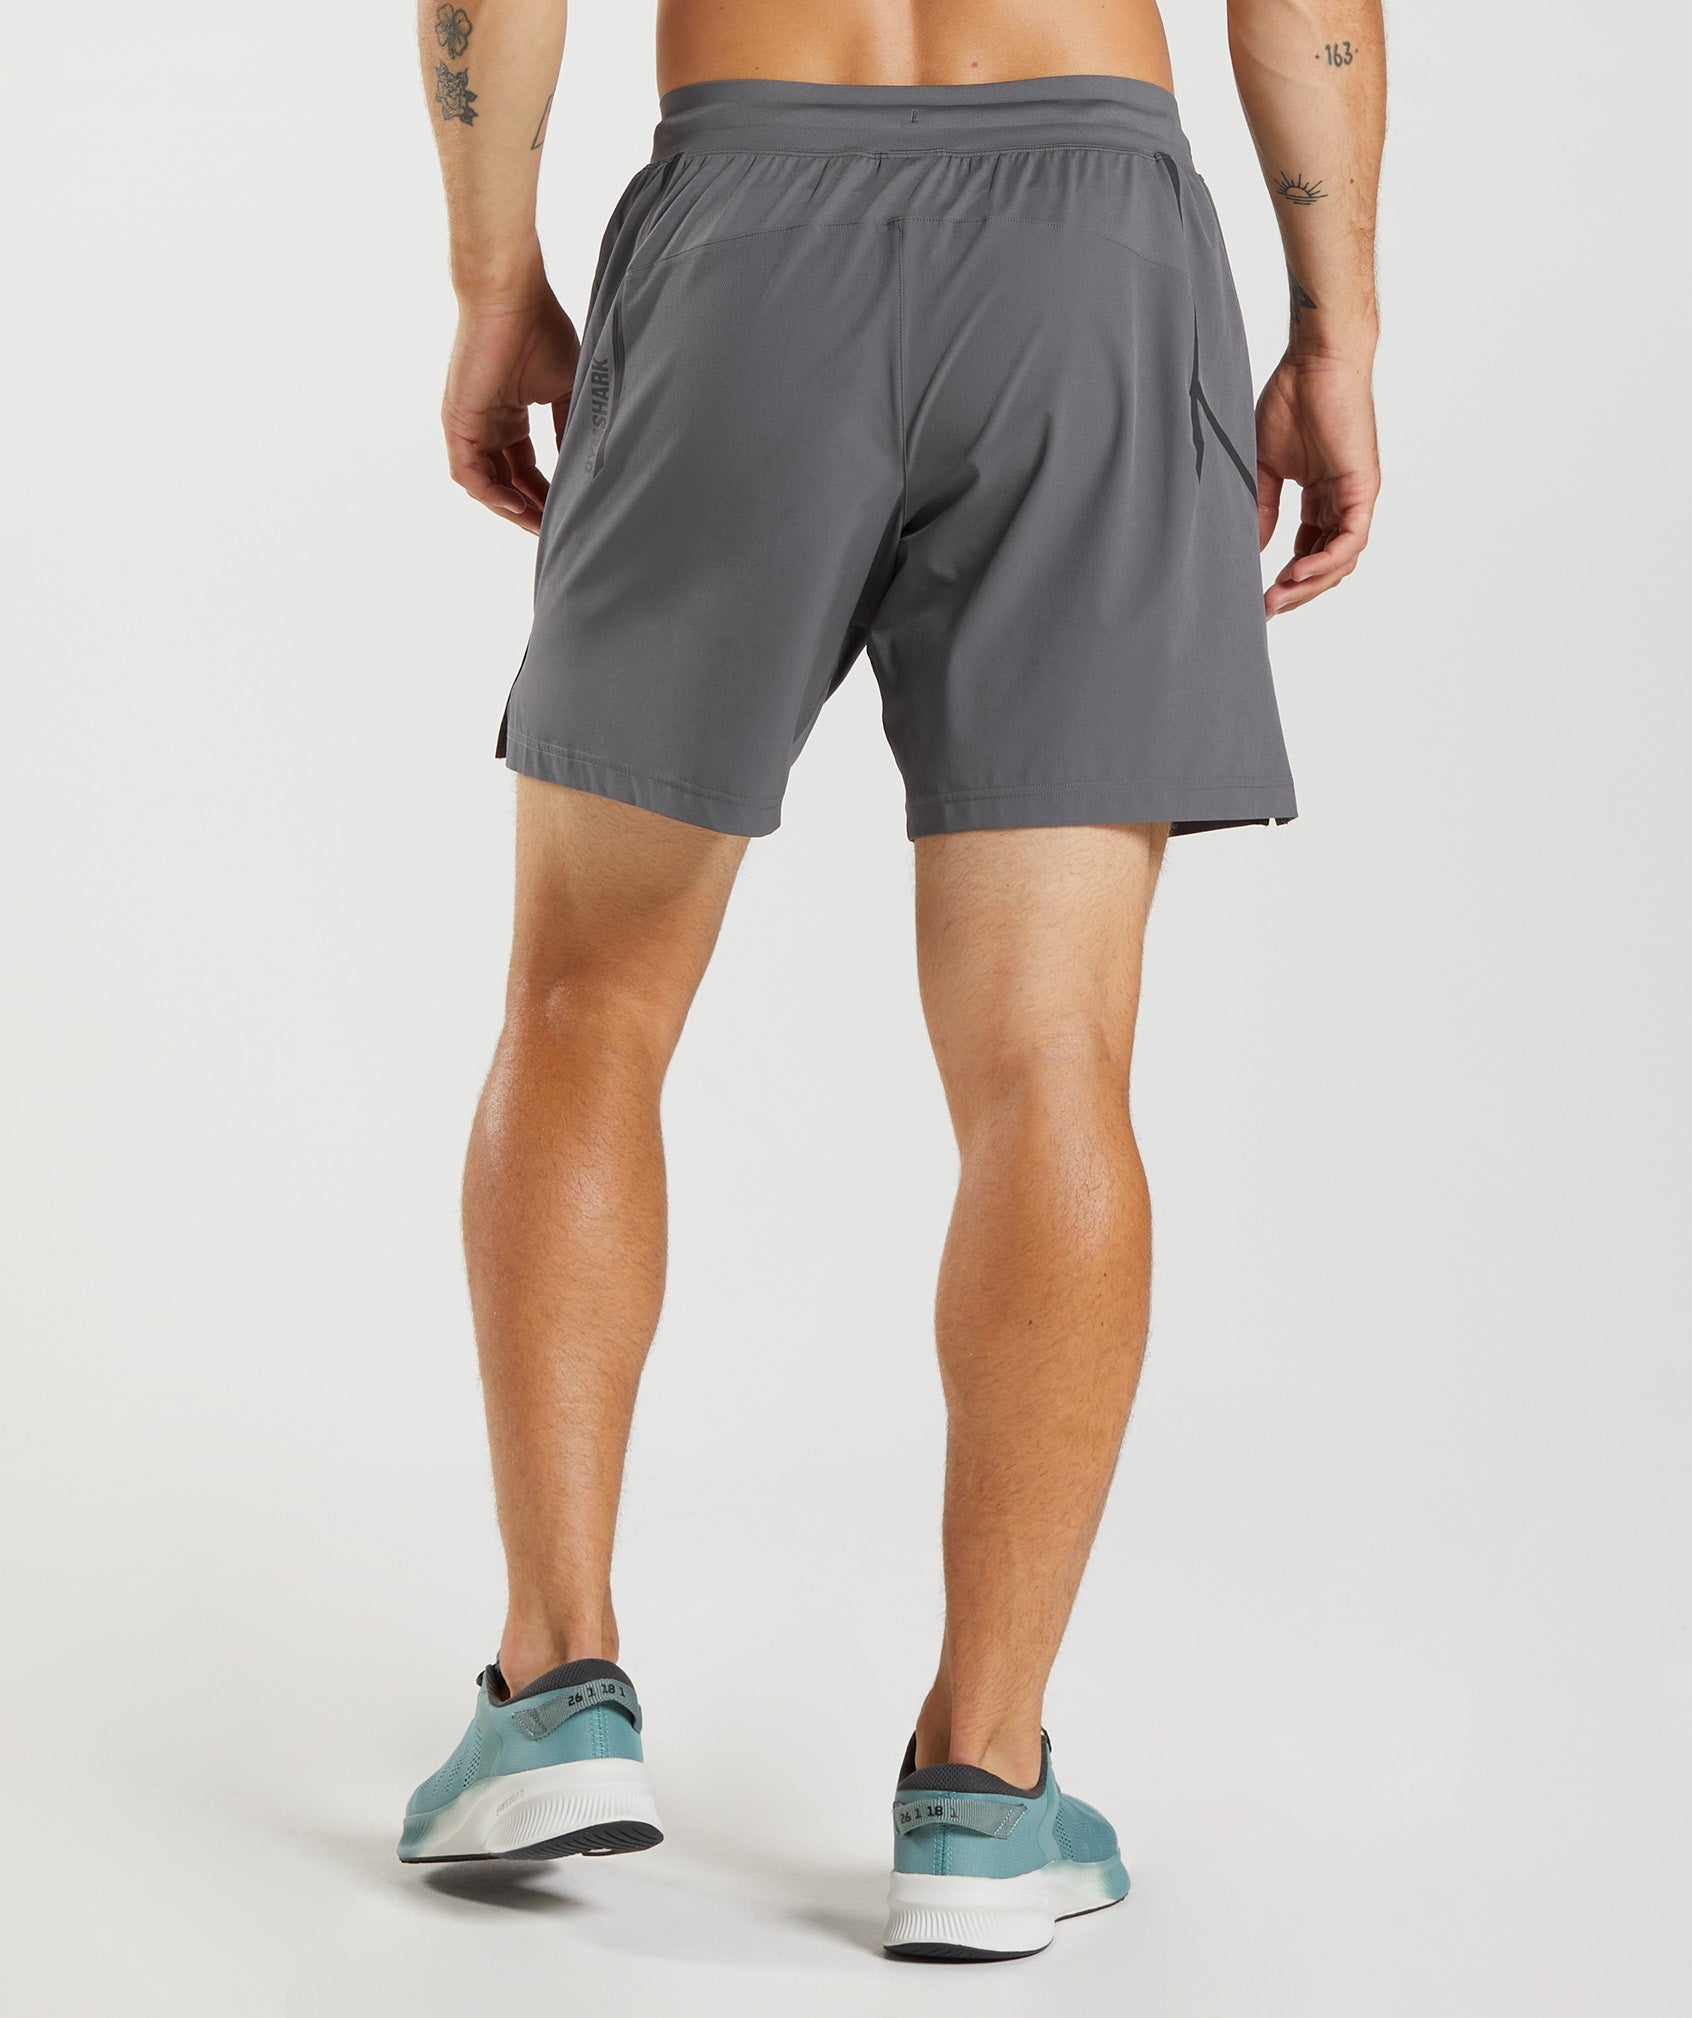 Apex 8" Function Shorts in Silhouette Grey